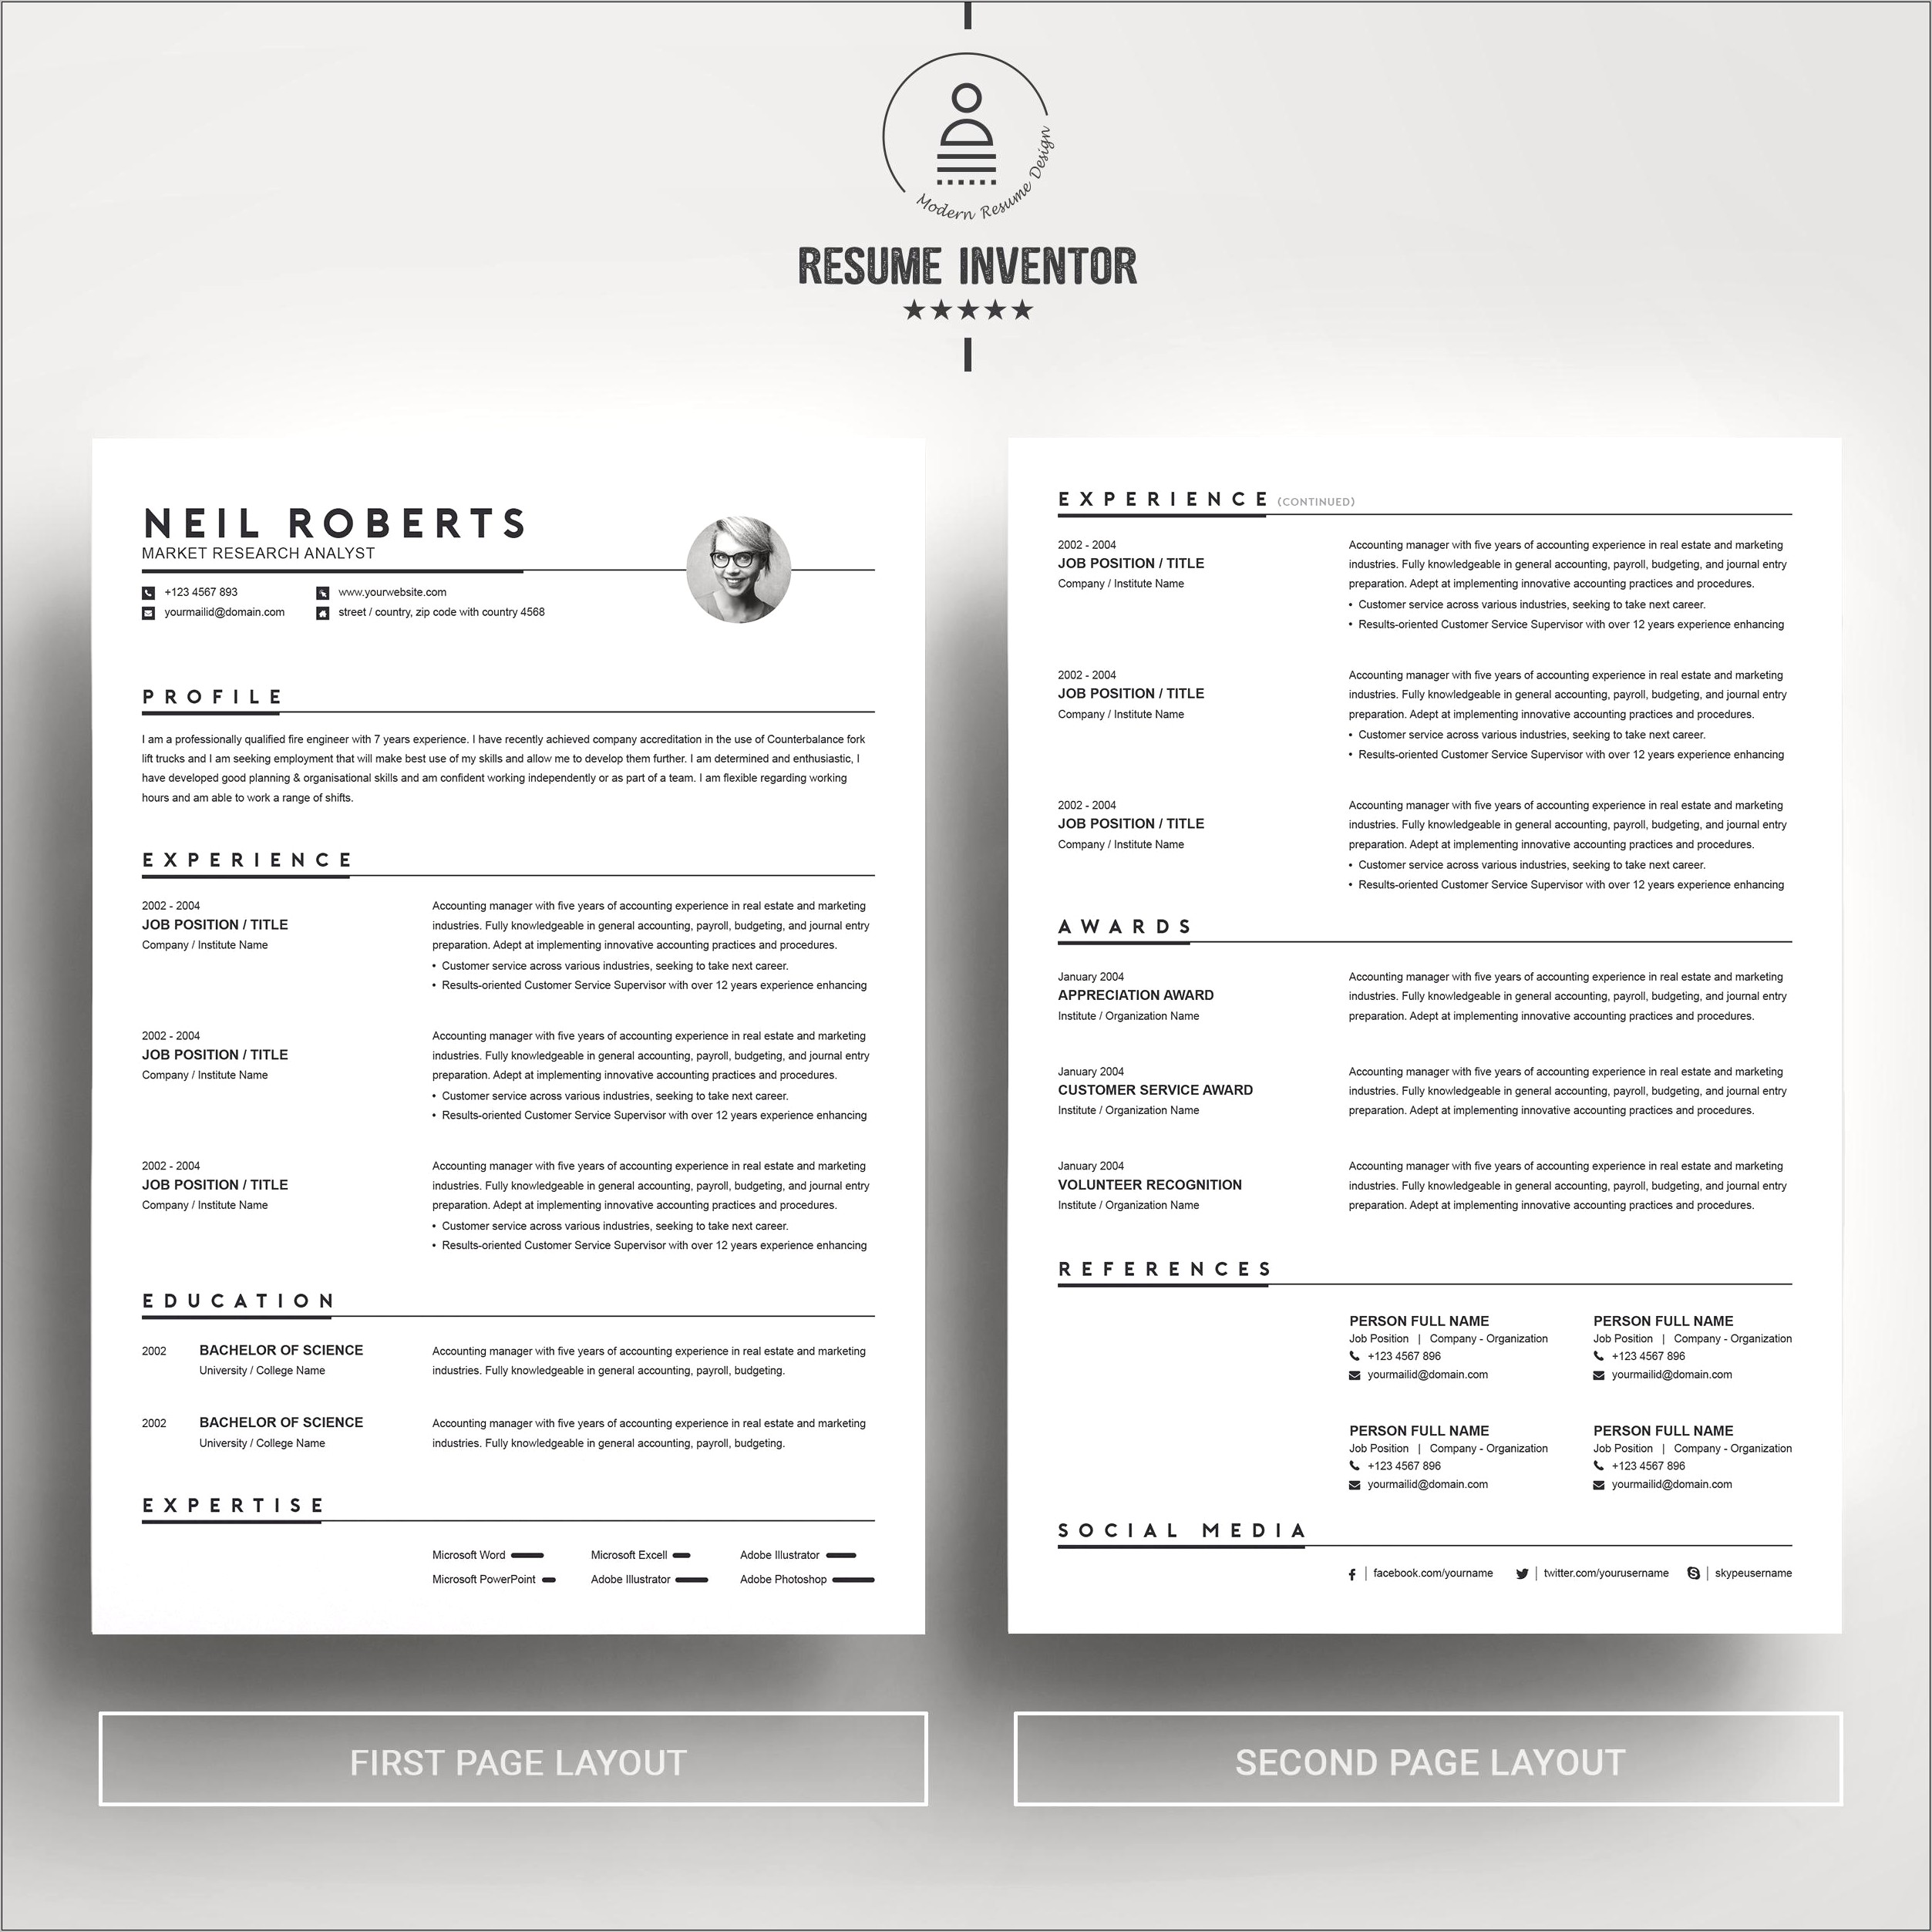 Sample Resumes For Real Estate Accountants